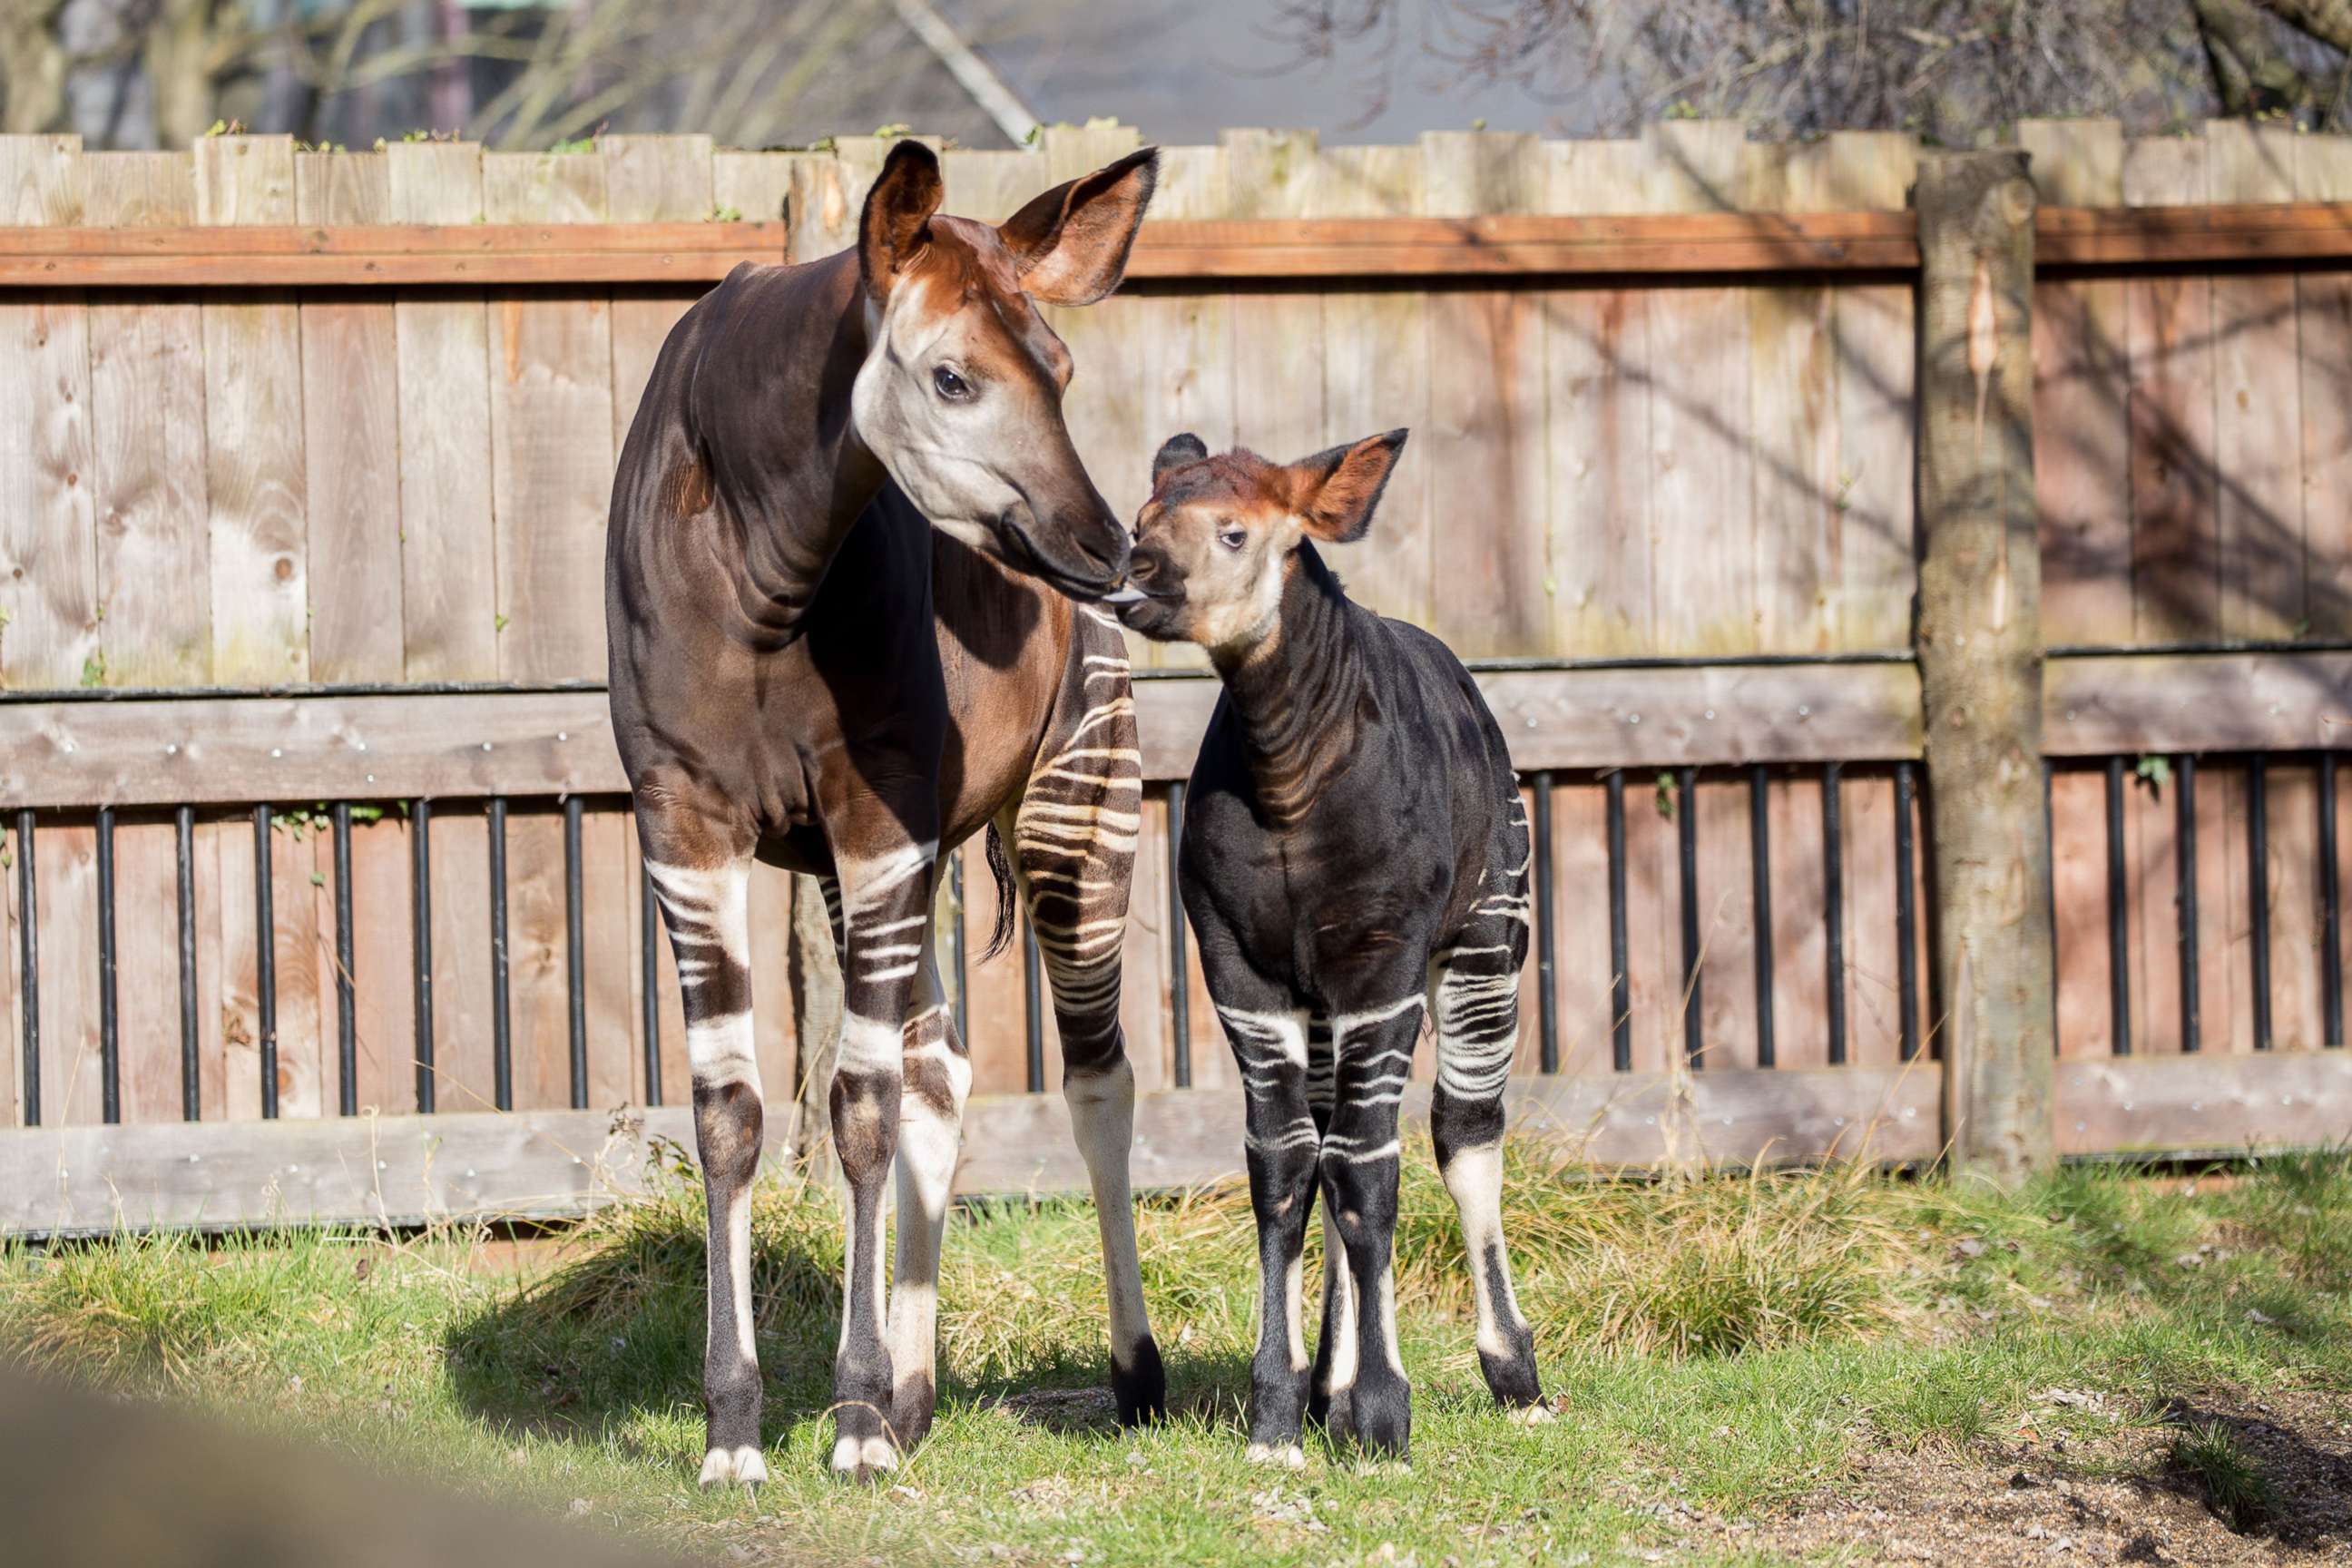 PHOTO: Meghan the okapi is introduced to the public at ZSL London Zoo, April 5, 2018. The four-month-old, named at birth after Meghan Markle in celebration of the forthcoming Royal Wedding is with her her mom, Oni.